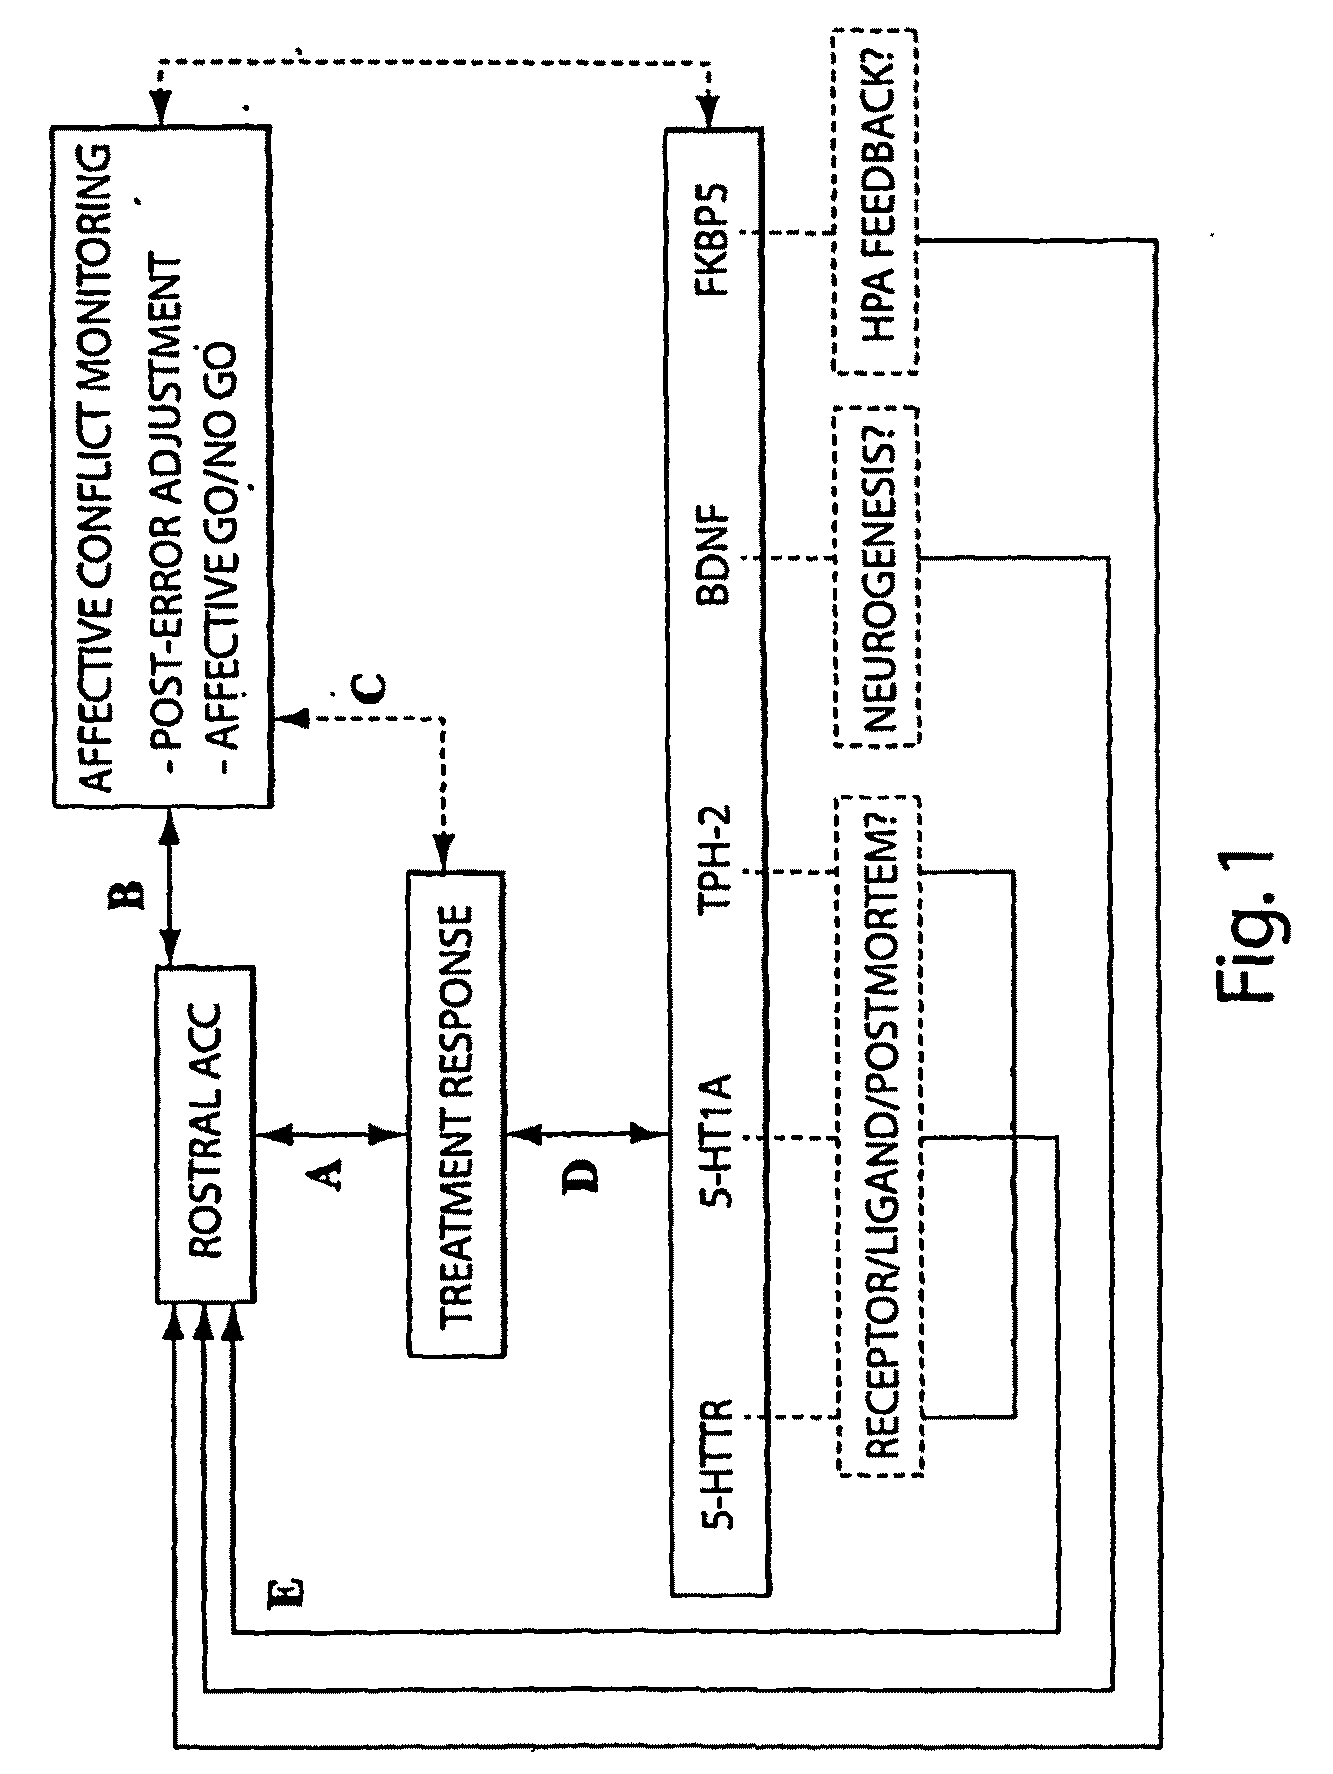 Systems and methods for predicting effectiveness in the treatment of psychiatric disorders, including depression